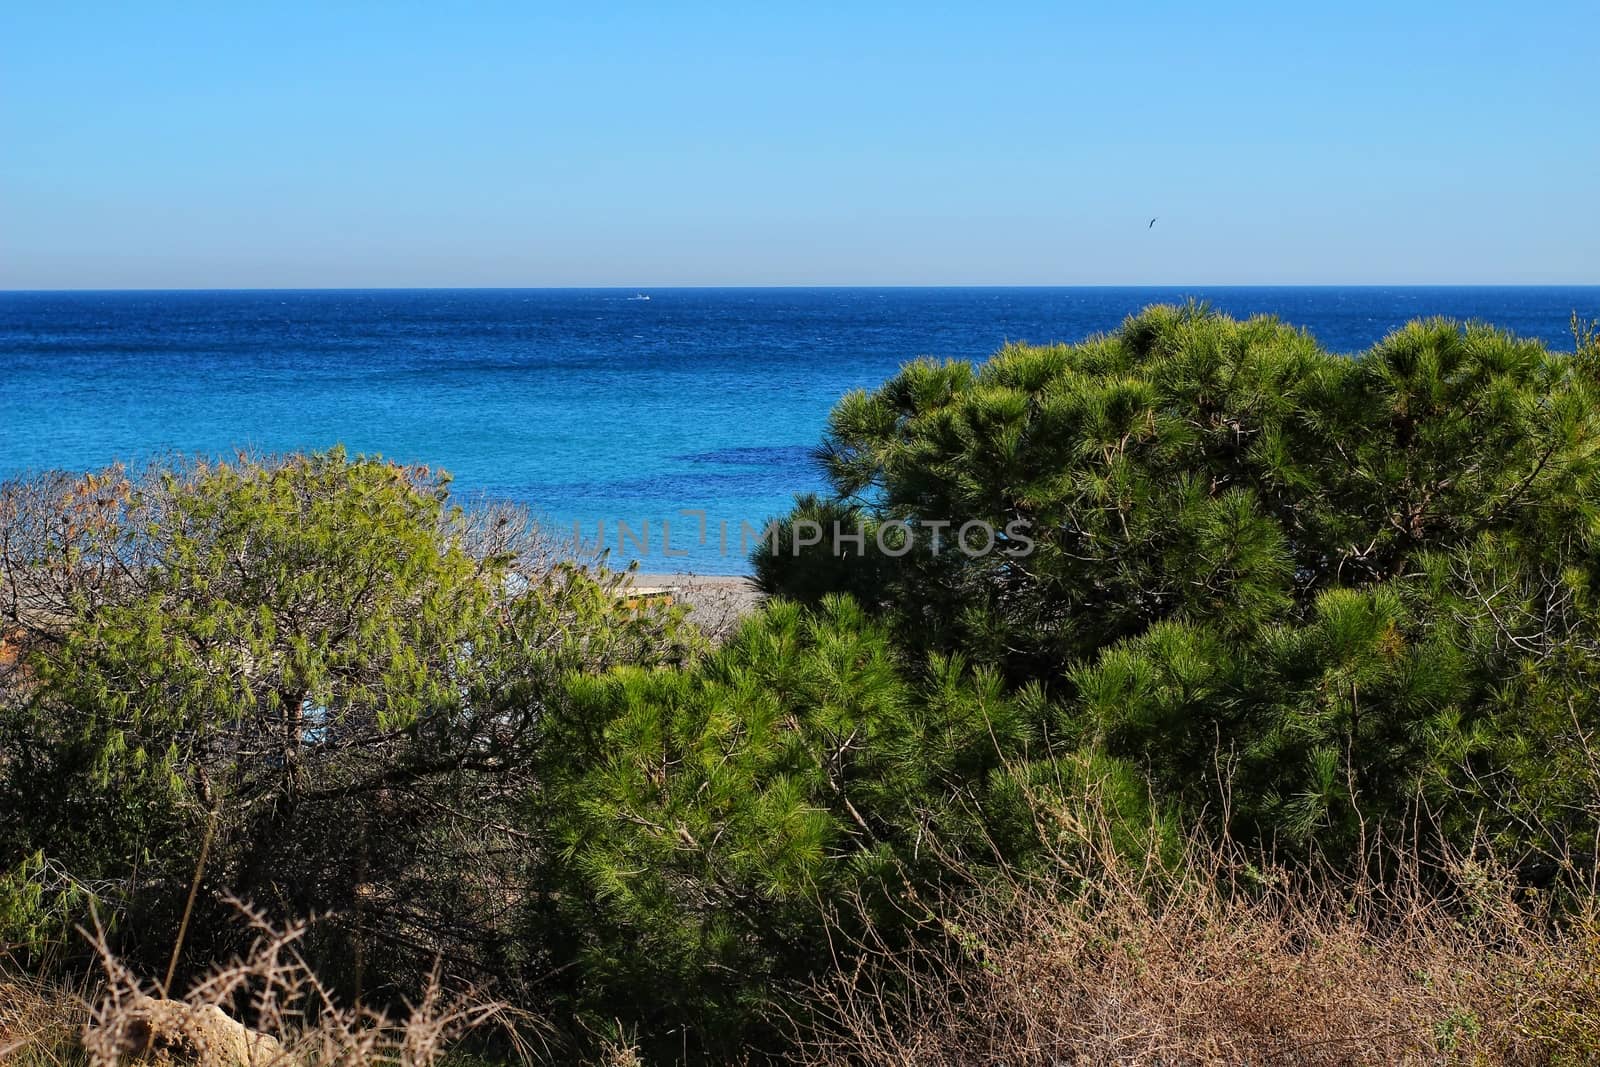 Green Landscape in southern Spain on the beach